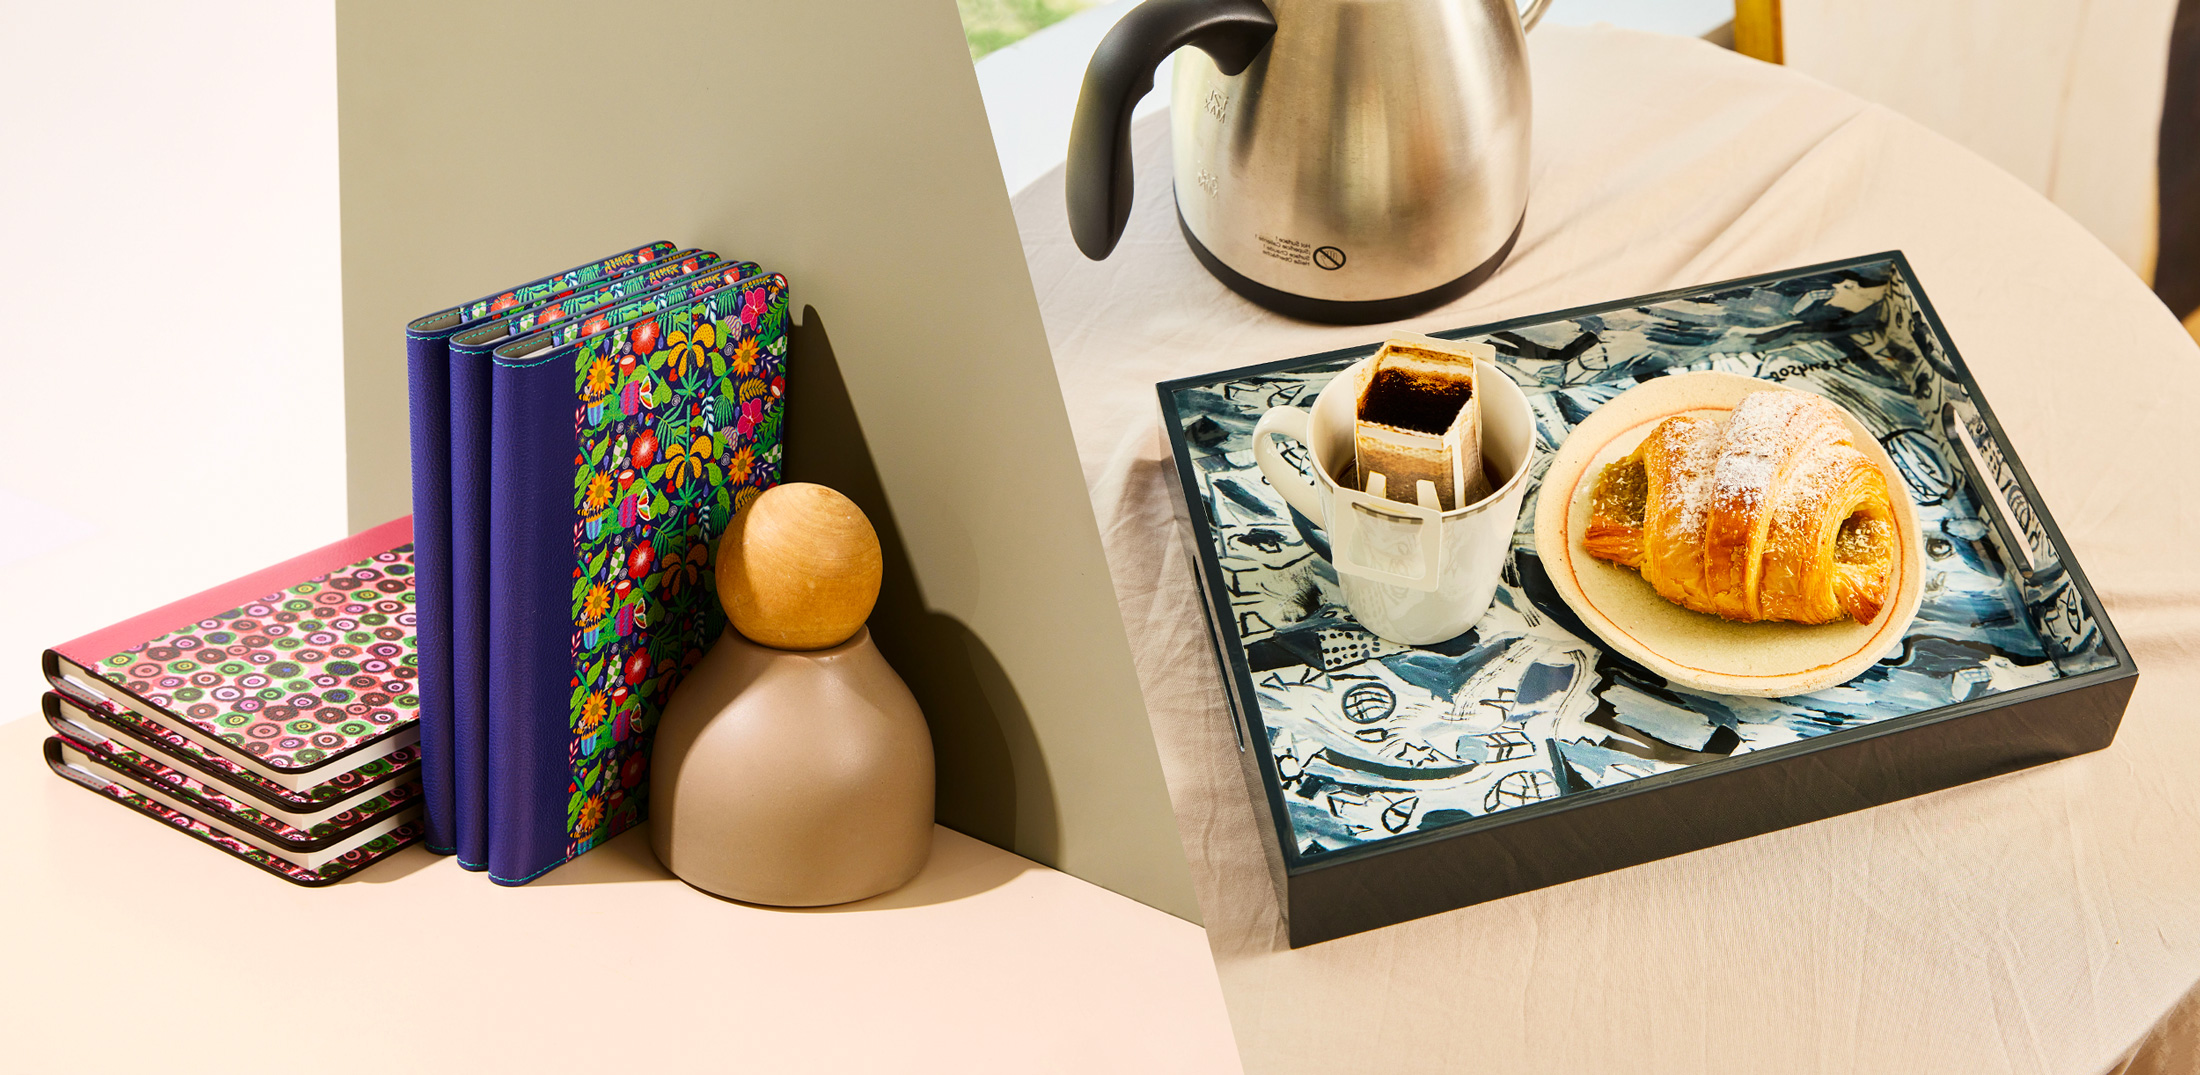 Image features notebooks and lacquerware trays with artworks by persons with disabilities.